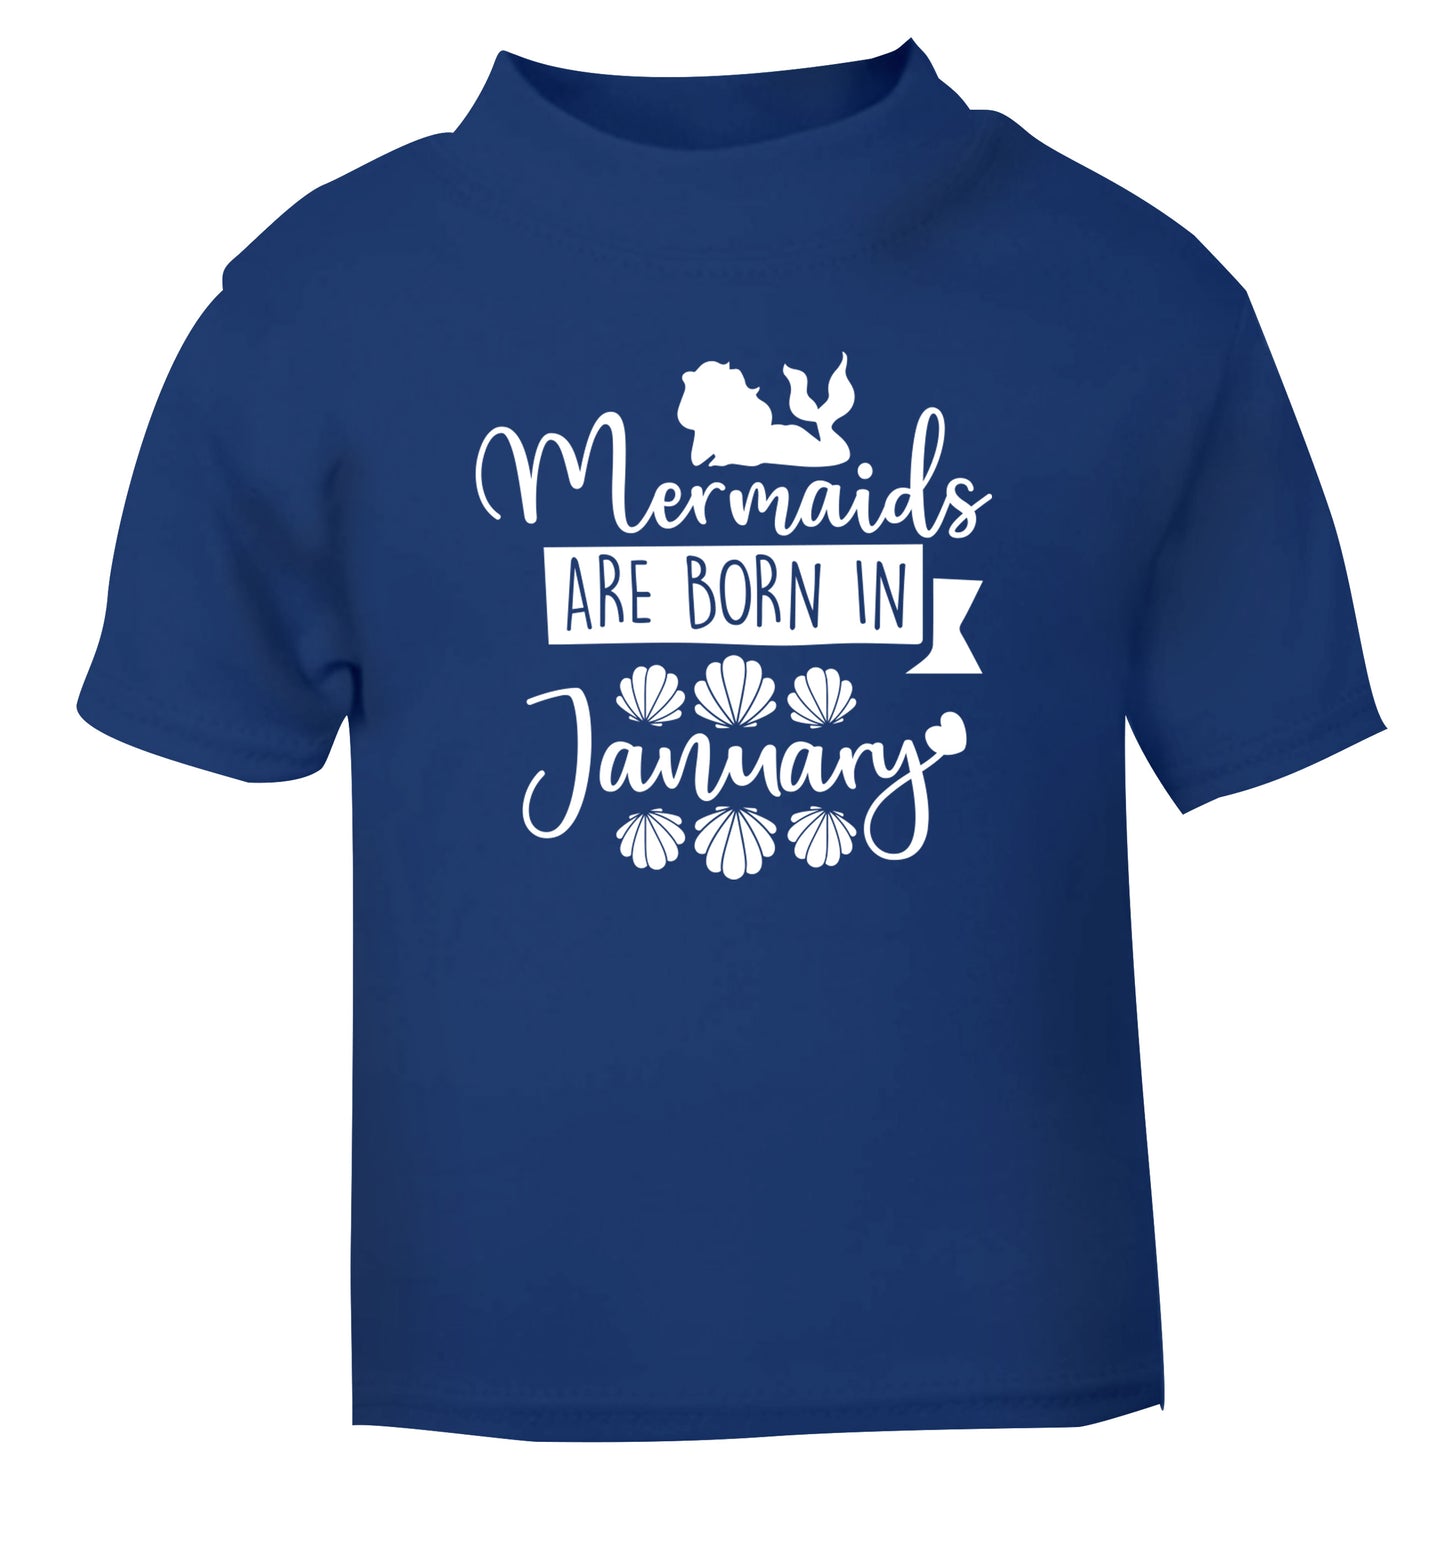 Mermaids are born in January blue Baby Toddler Tshirt 2 Years